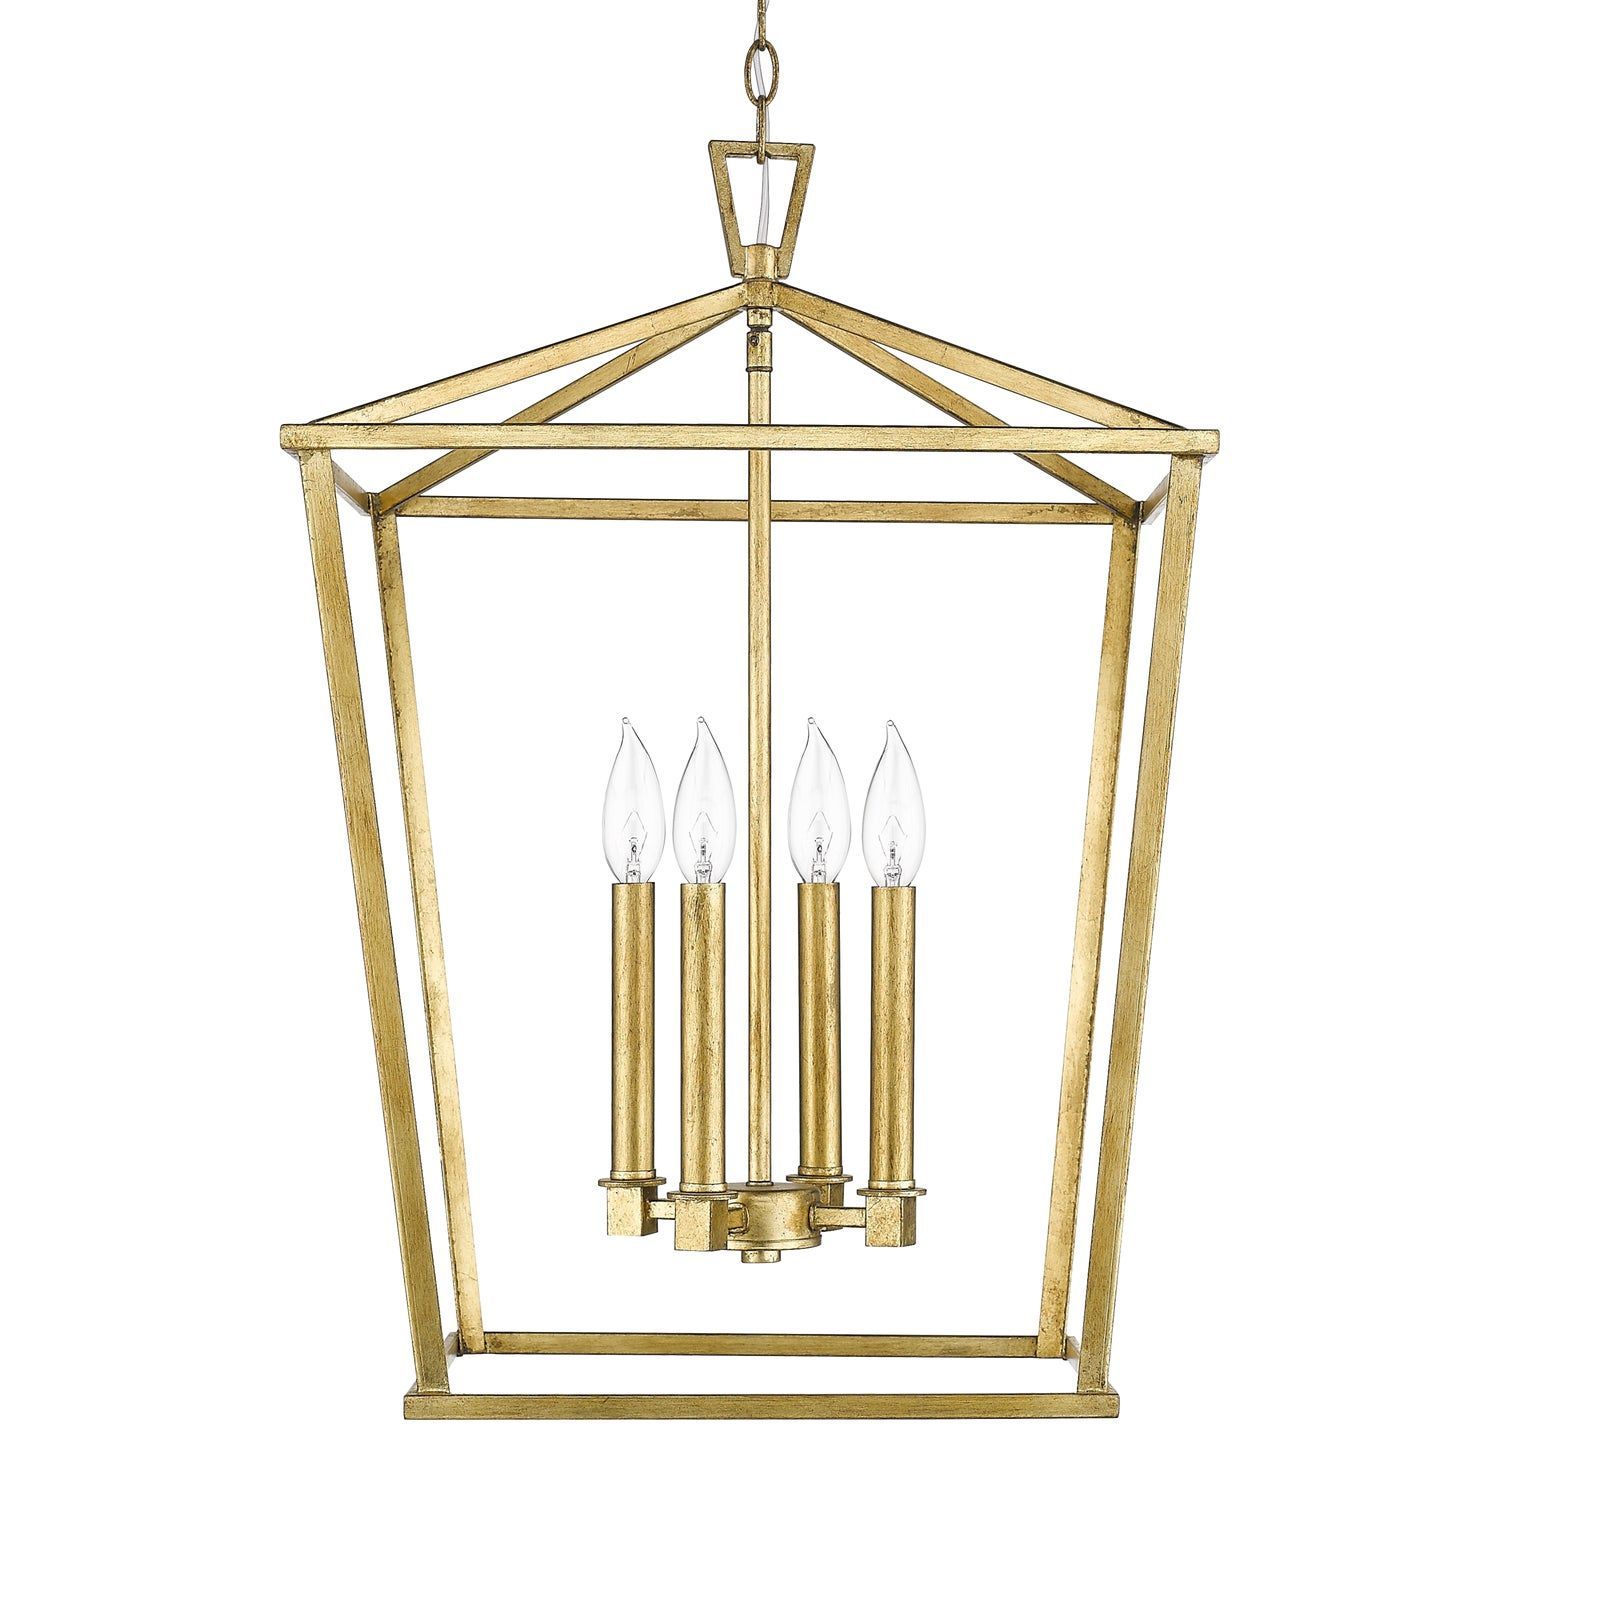 Ponce City 4 Light Pendant, Gilded Gold | Pendant Lighting, Square Pendant  Lighting, Gold Light Fixture With Regard To Gilded Gold Lantern Chandeliers (View 10 of 15)